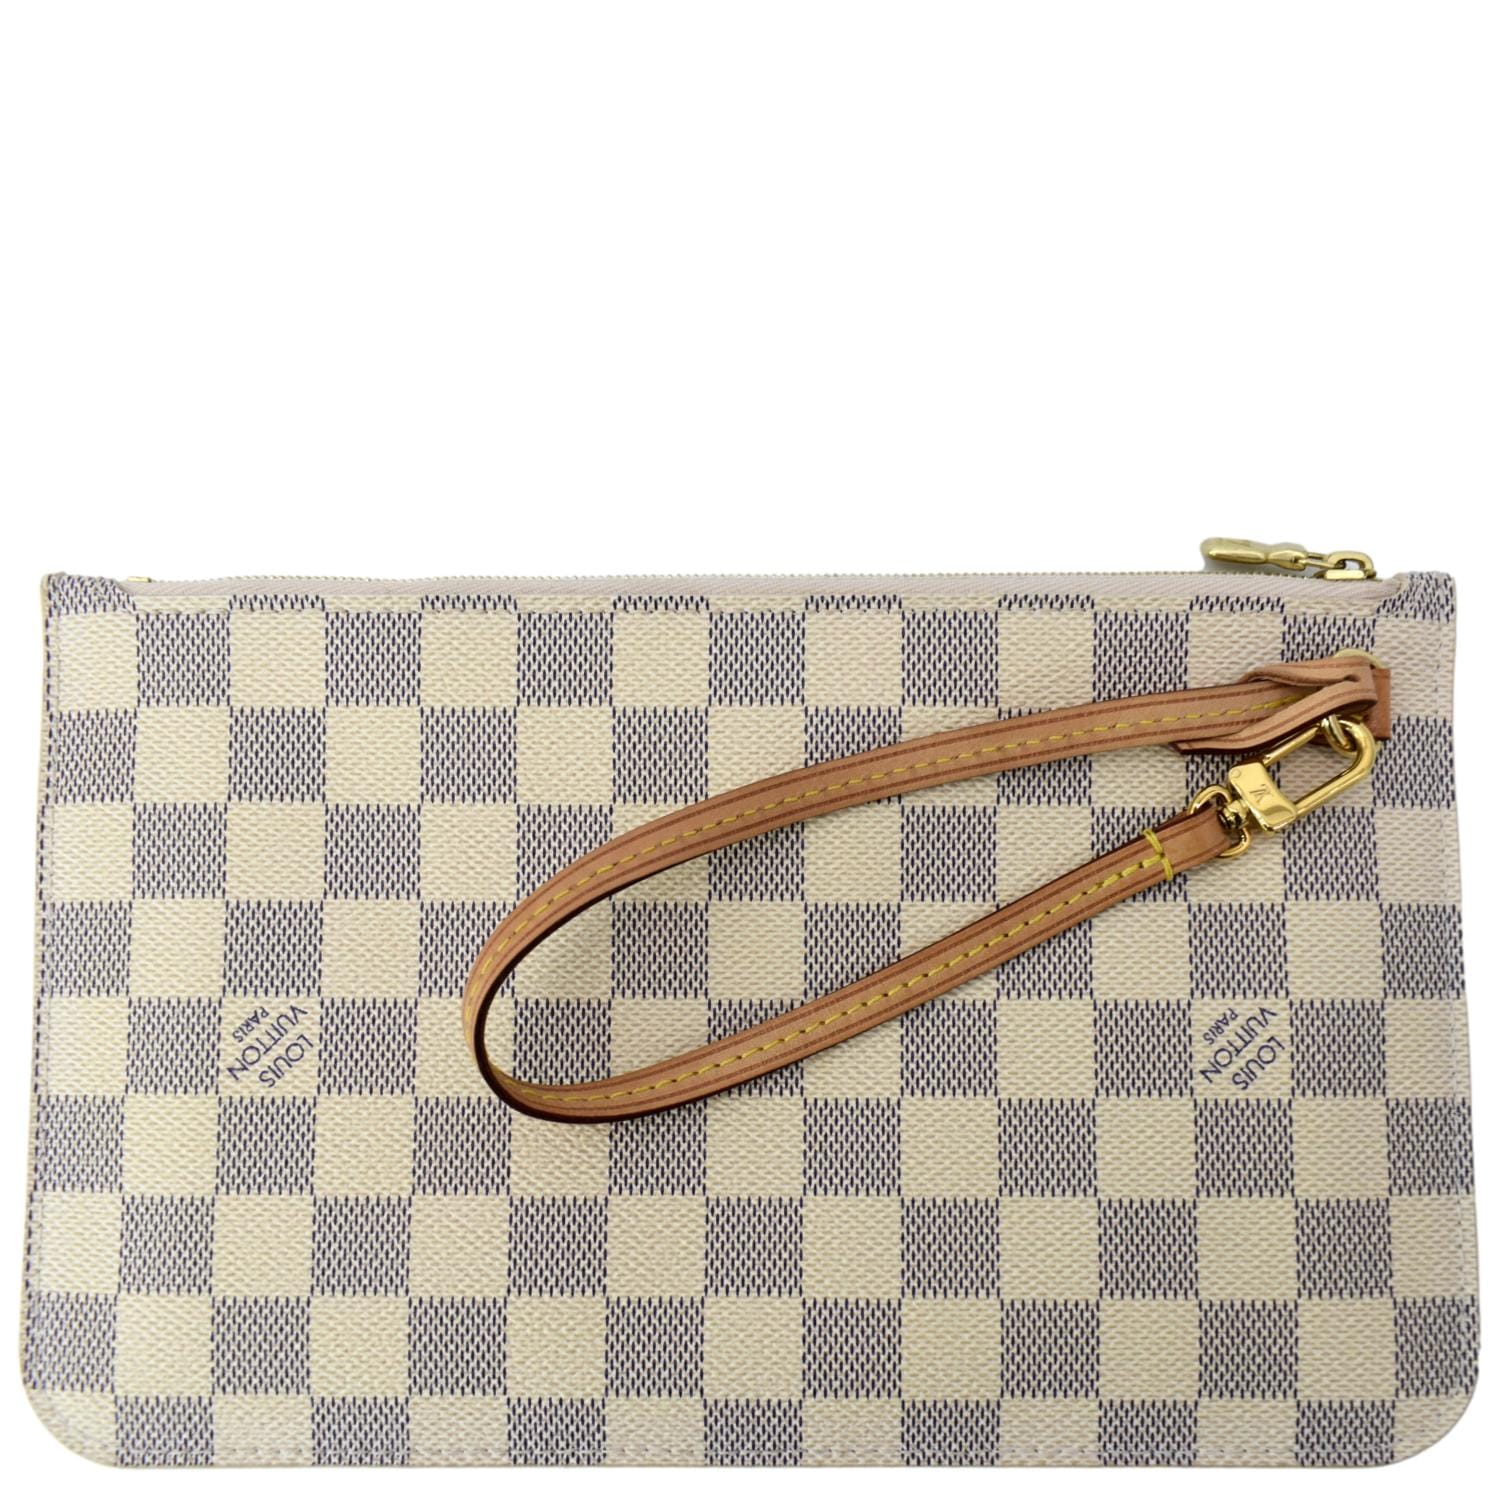 Louis Vuitton Neverfull Pouch White Canvas Clutch Bag (Pre-Owned